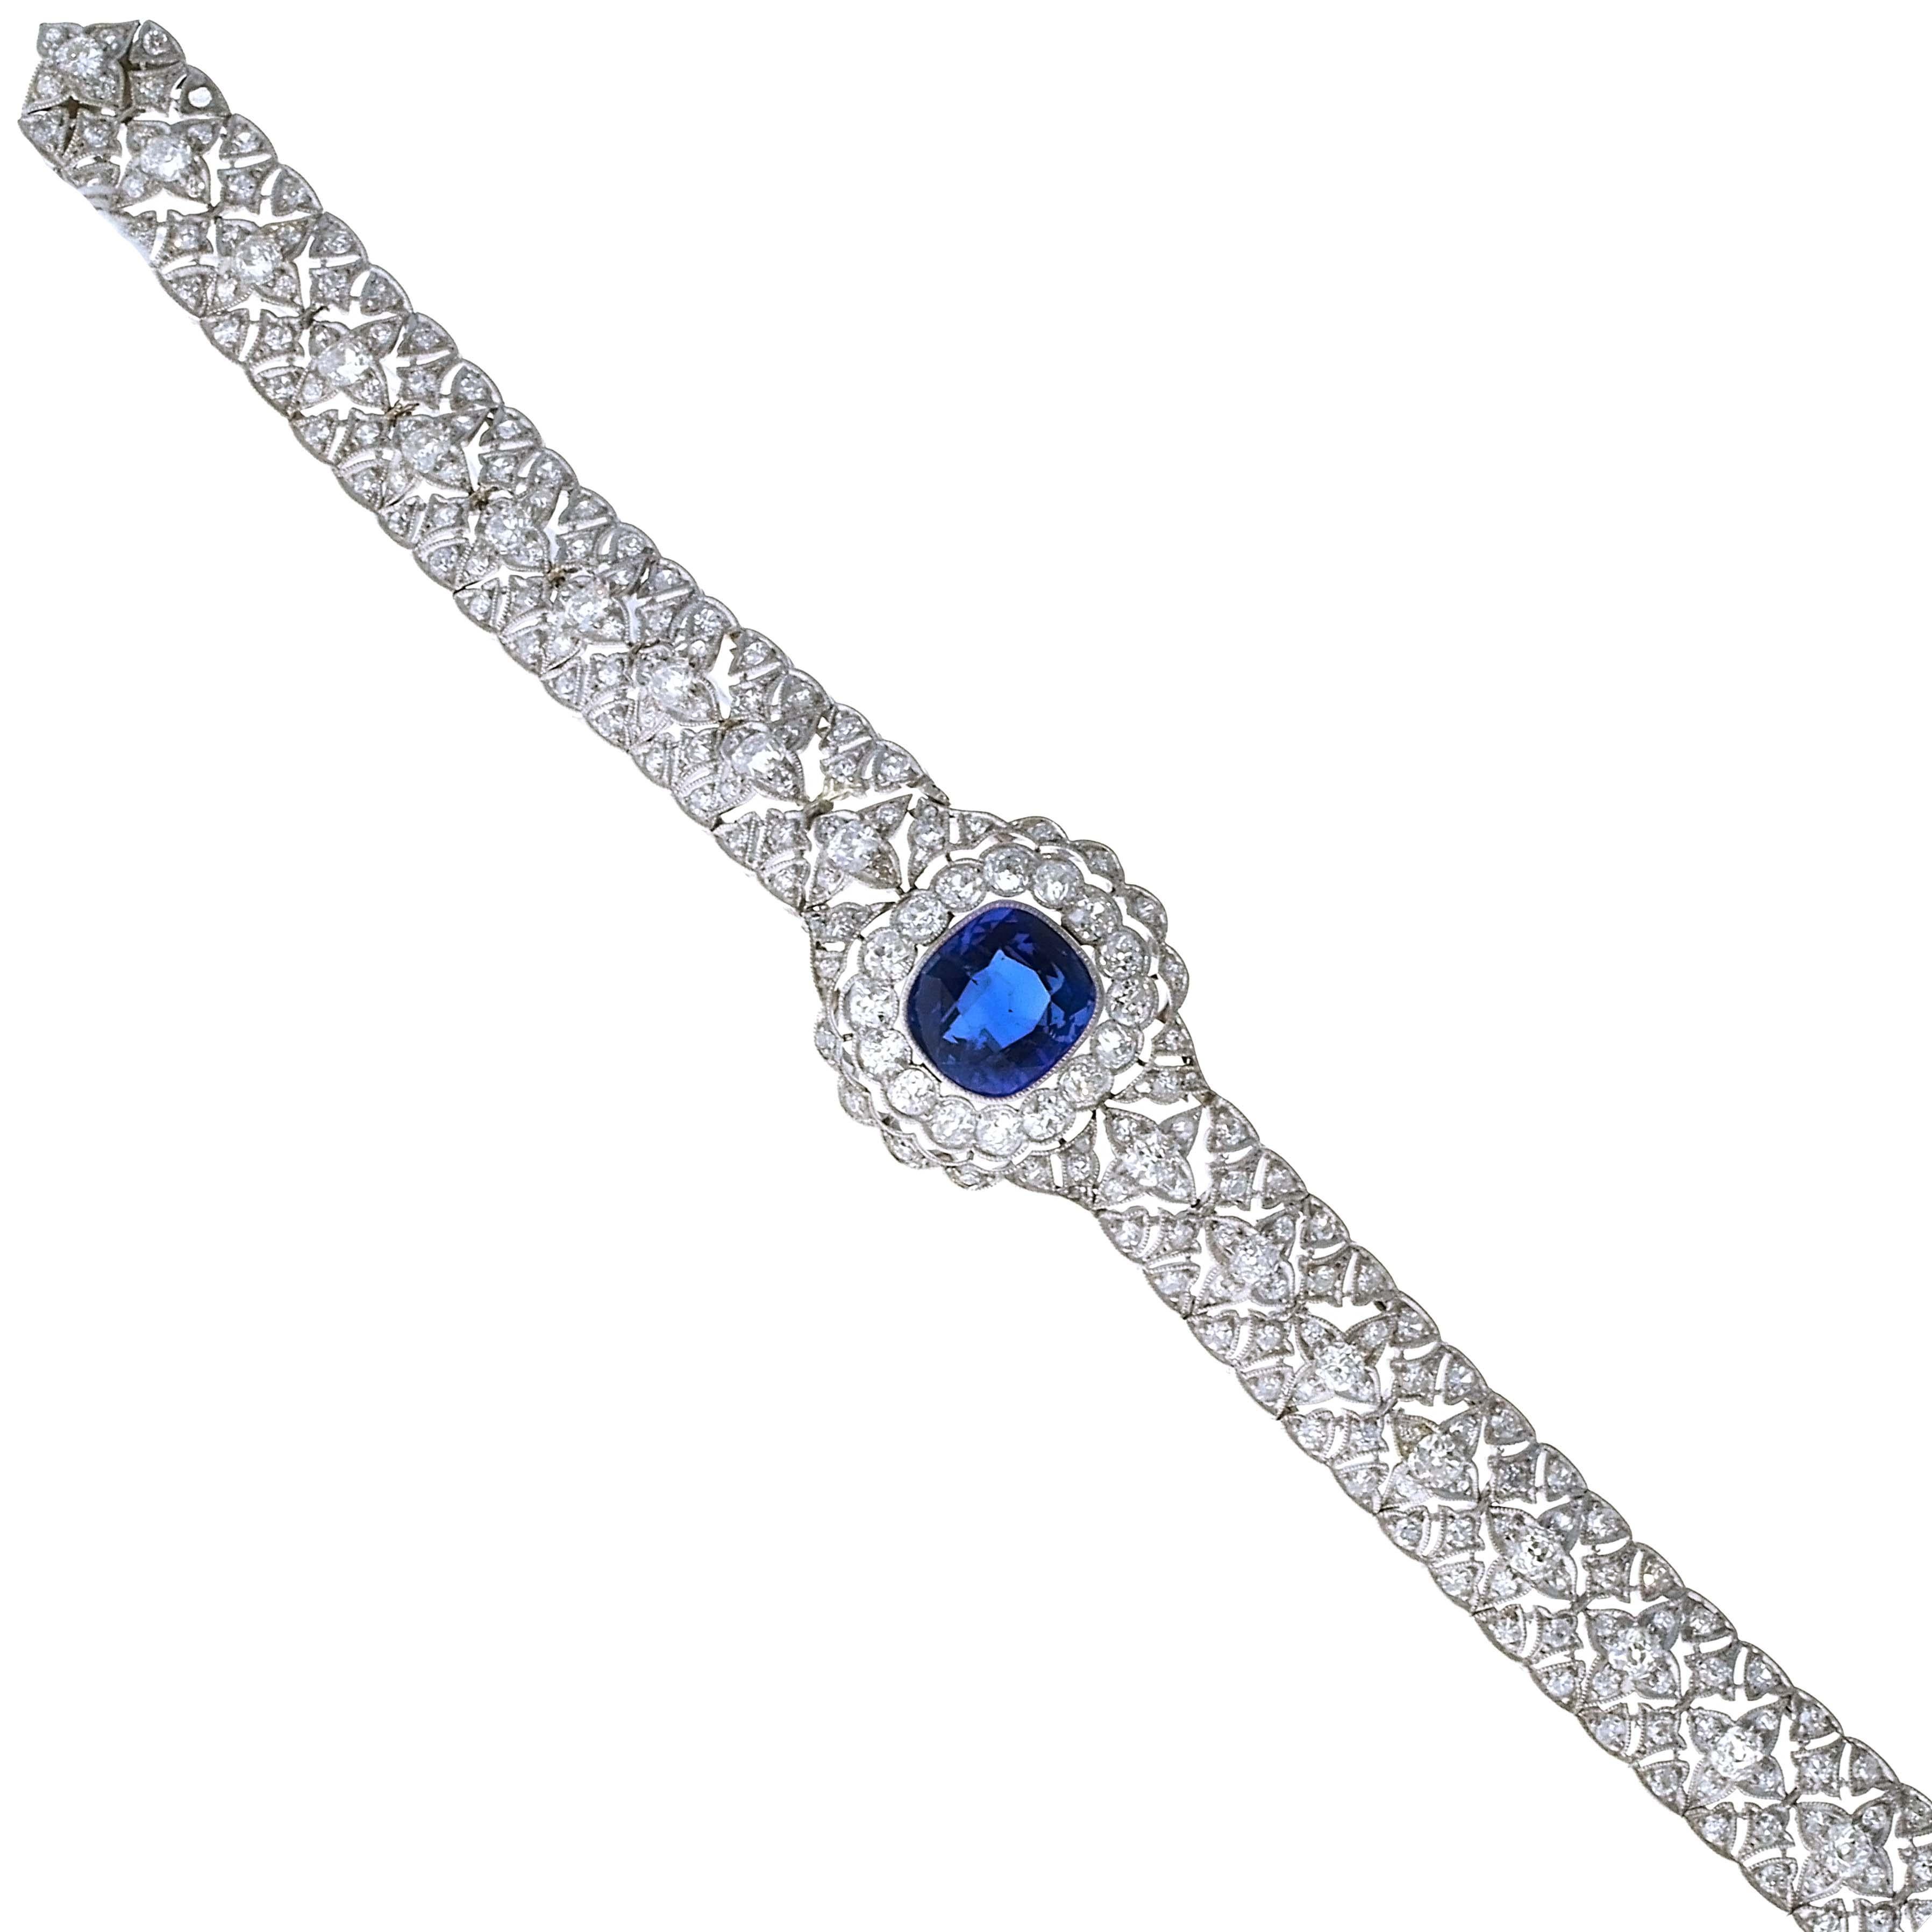 Antique 1920's Art Deco bracelet, crafted in platinum and 18 karat white gold showcasing a GCS-certified, unheated Burmeas cushion cut blue sapphire weighing 5.85 carats.
This antique bracelet has bright-white old European-cut diamonds set